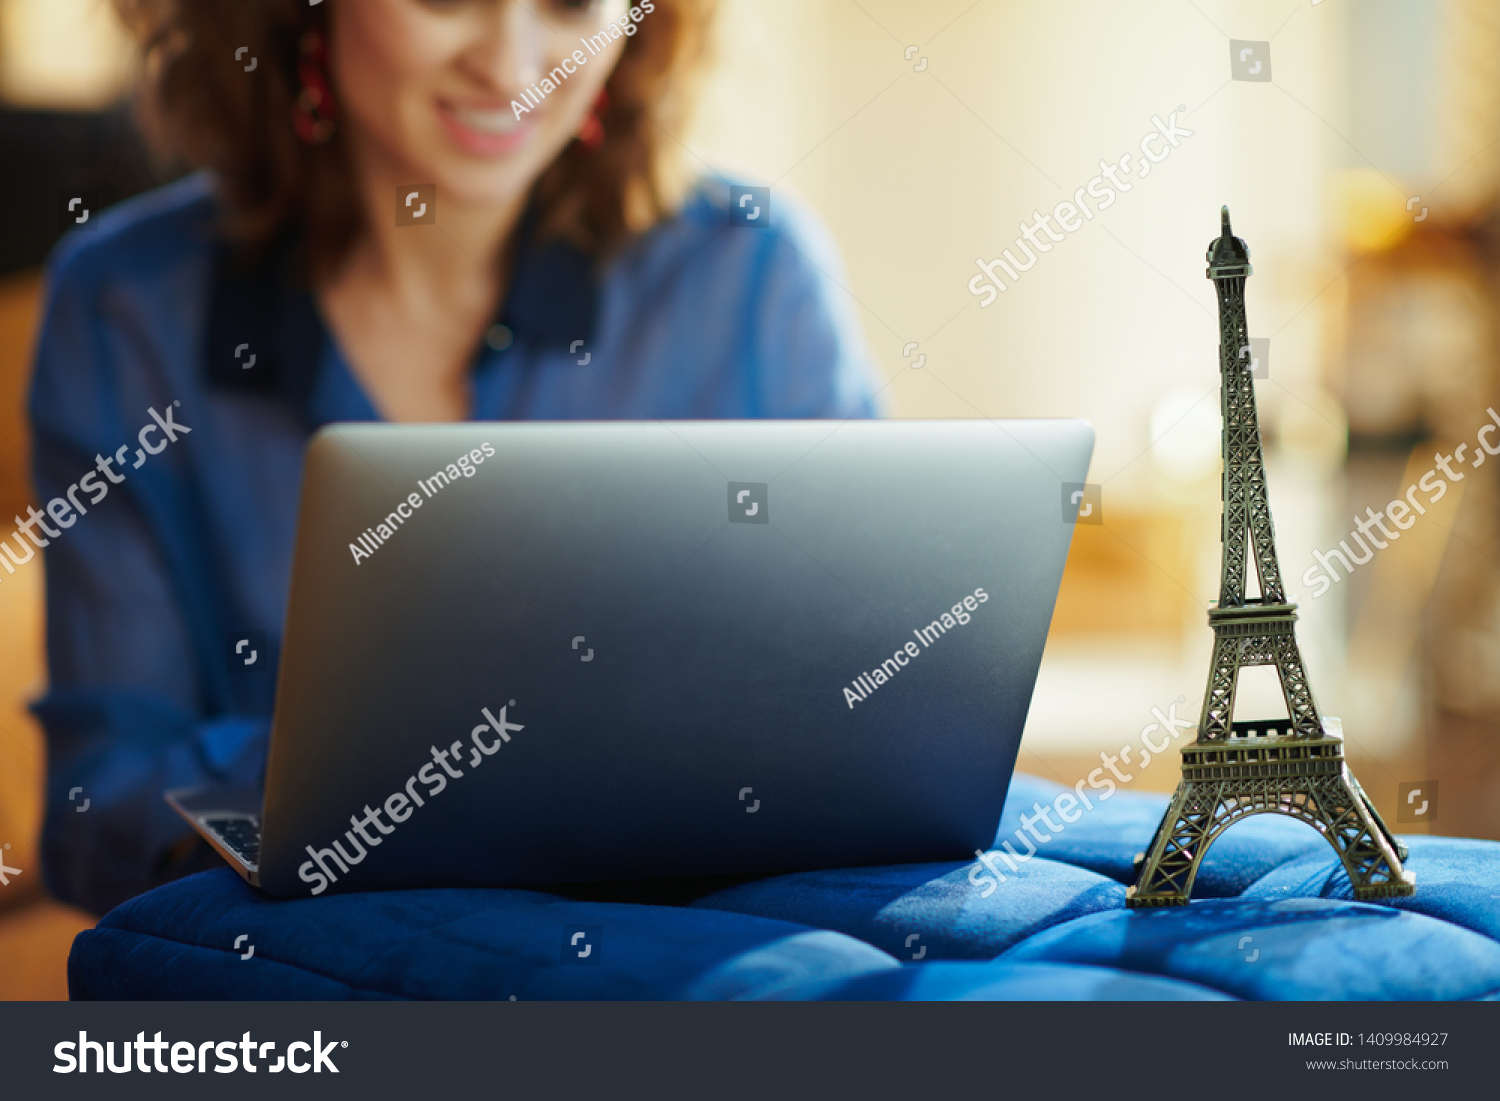 Closeup on a souvenir of the eiffel tower and woman with laptop in background at modern home in sunny summer day. A fake website is made for illustrative purposes. #1409984927